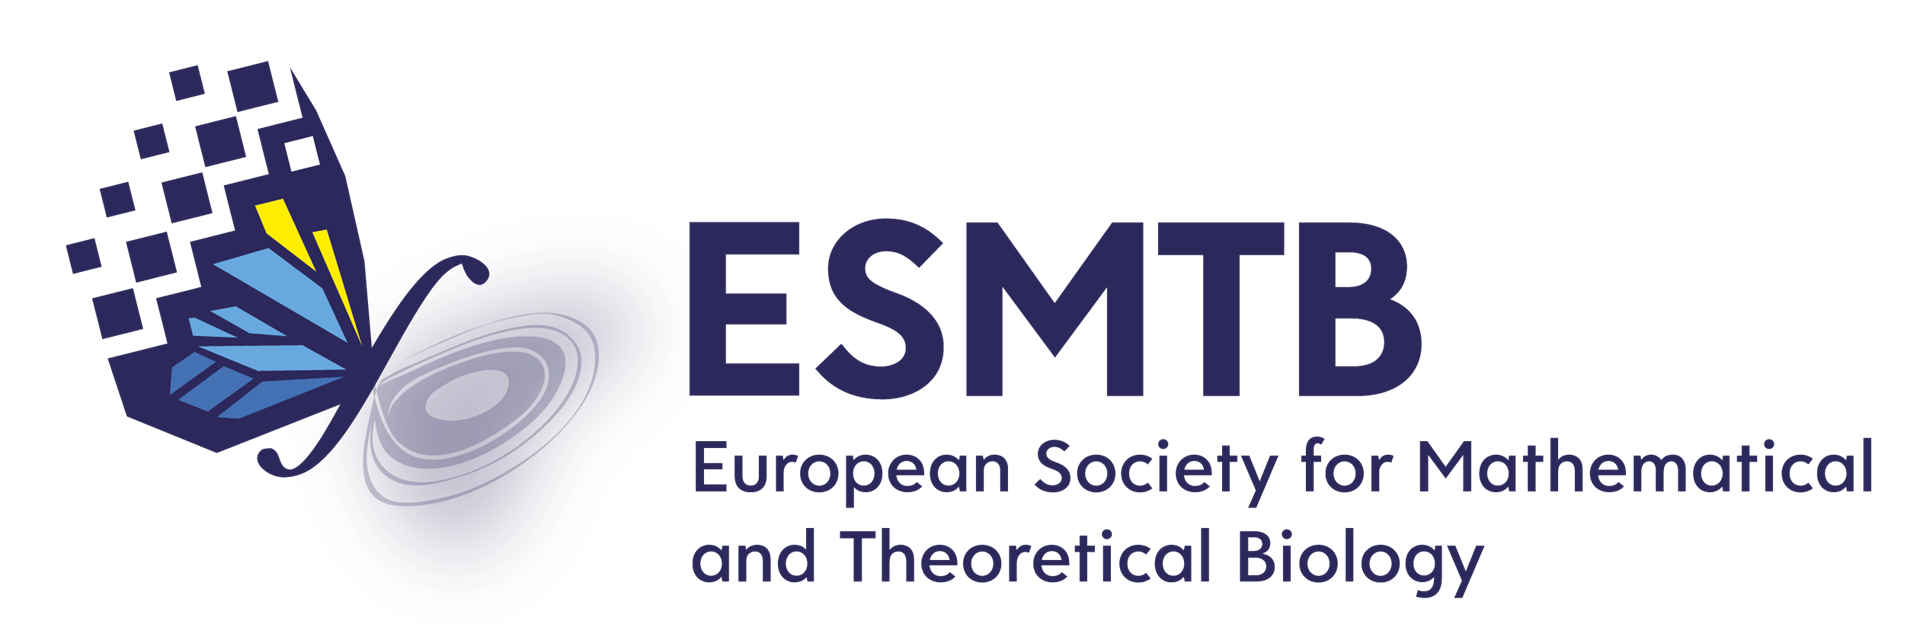 logo of "European Society for Mathematical and Theoretical Biology (ESMTB)"